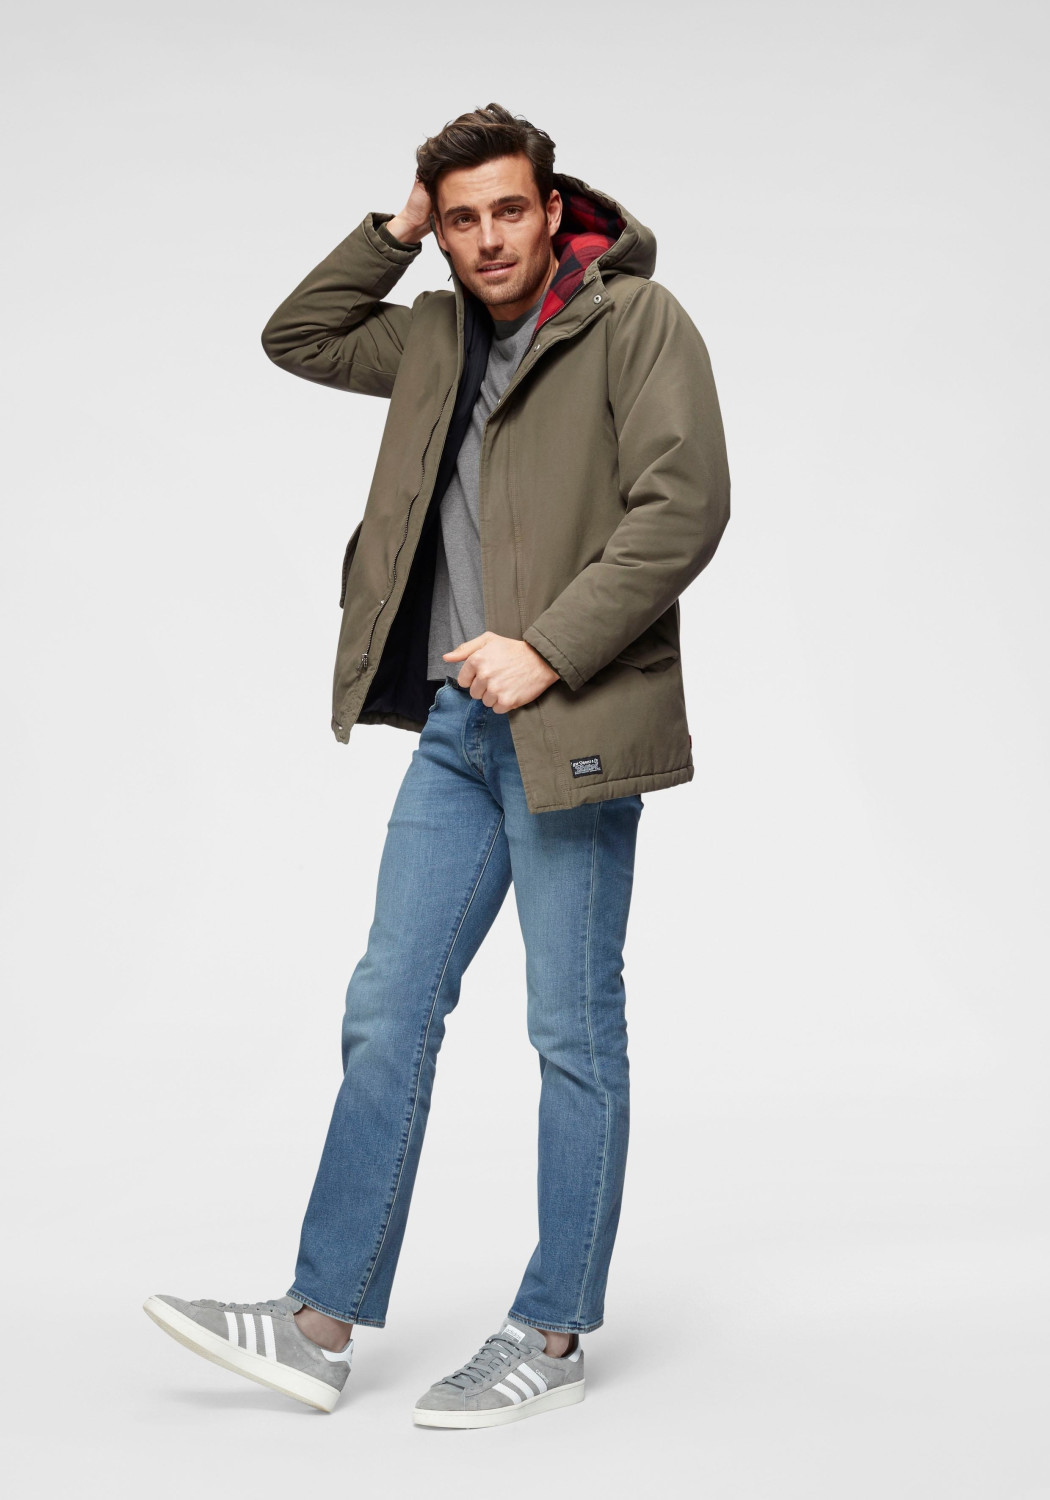 Buy Levi's 501 Original Fit ironwood from £50.00 (Today) – Best Deals idealo.co.uk